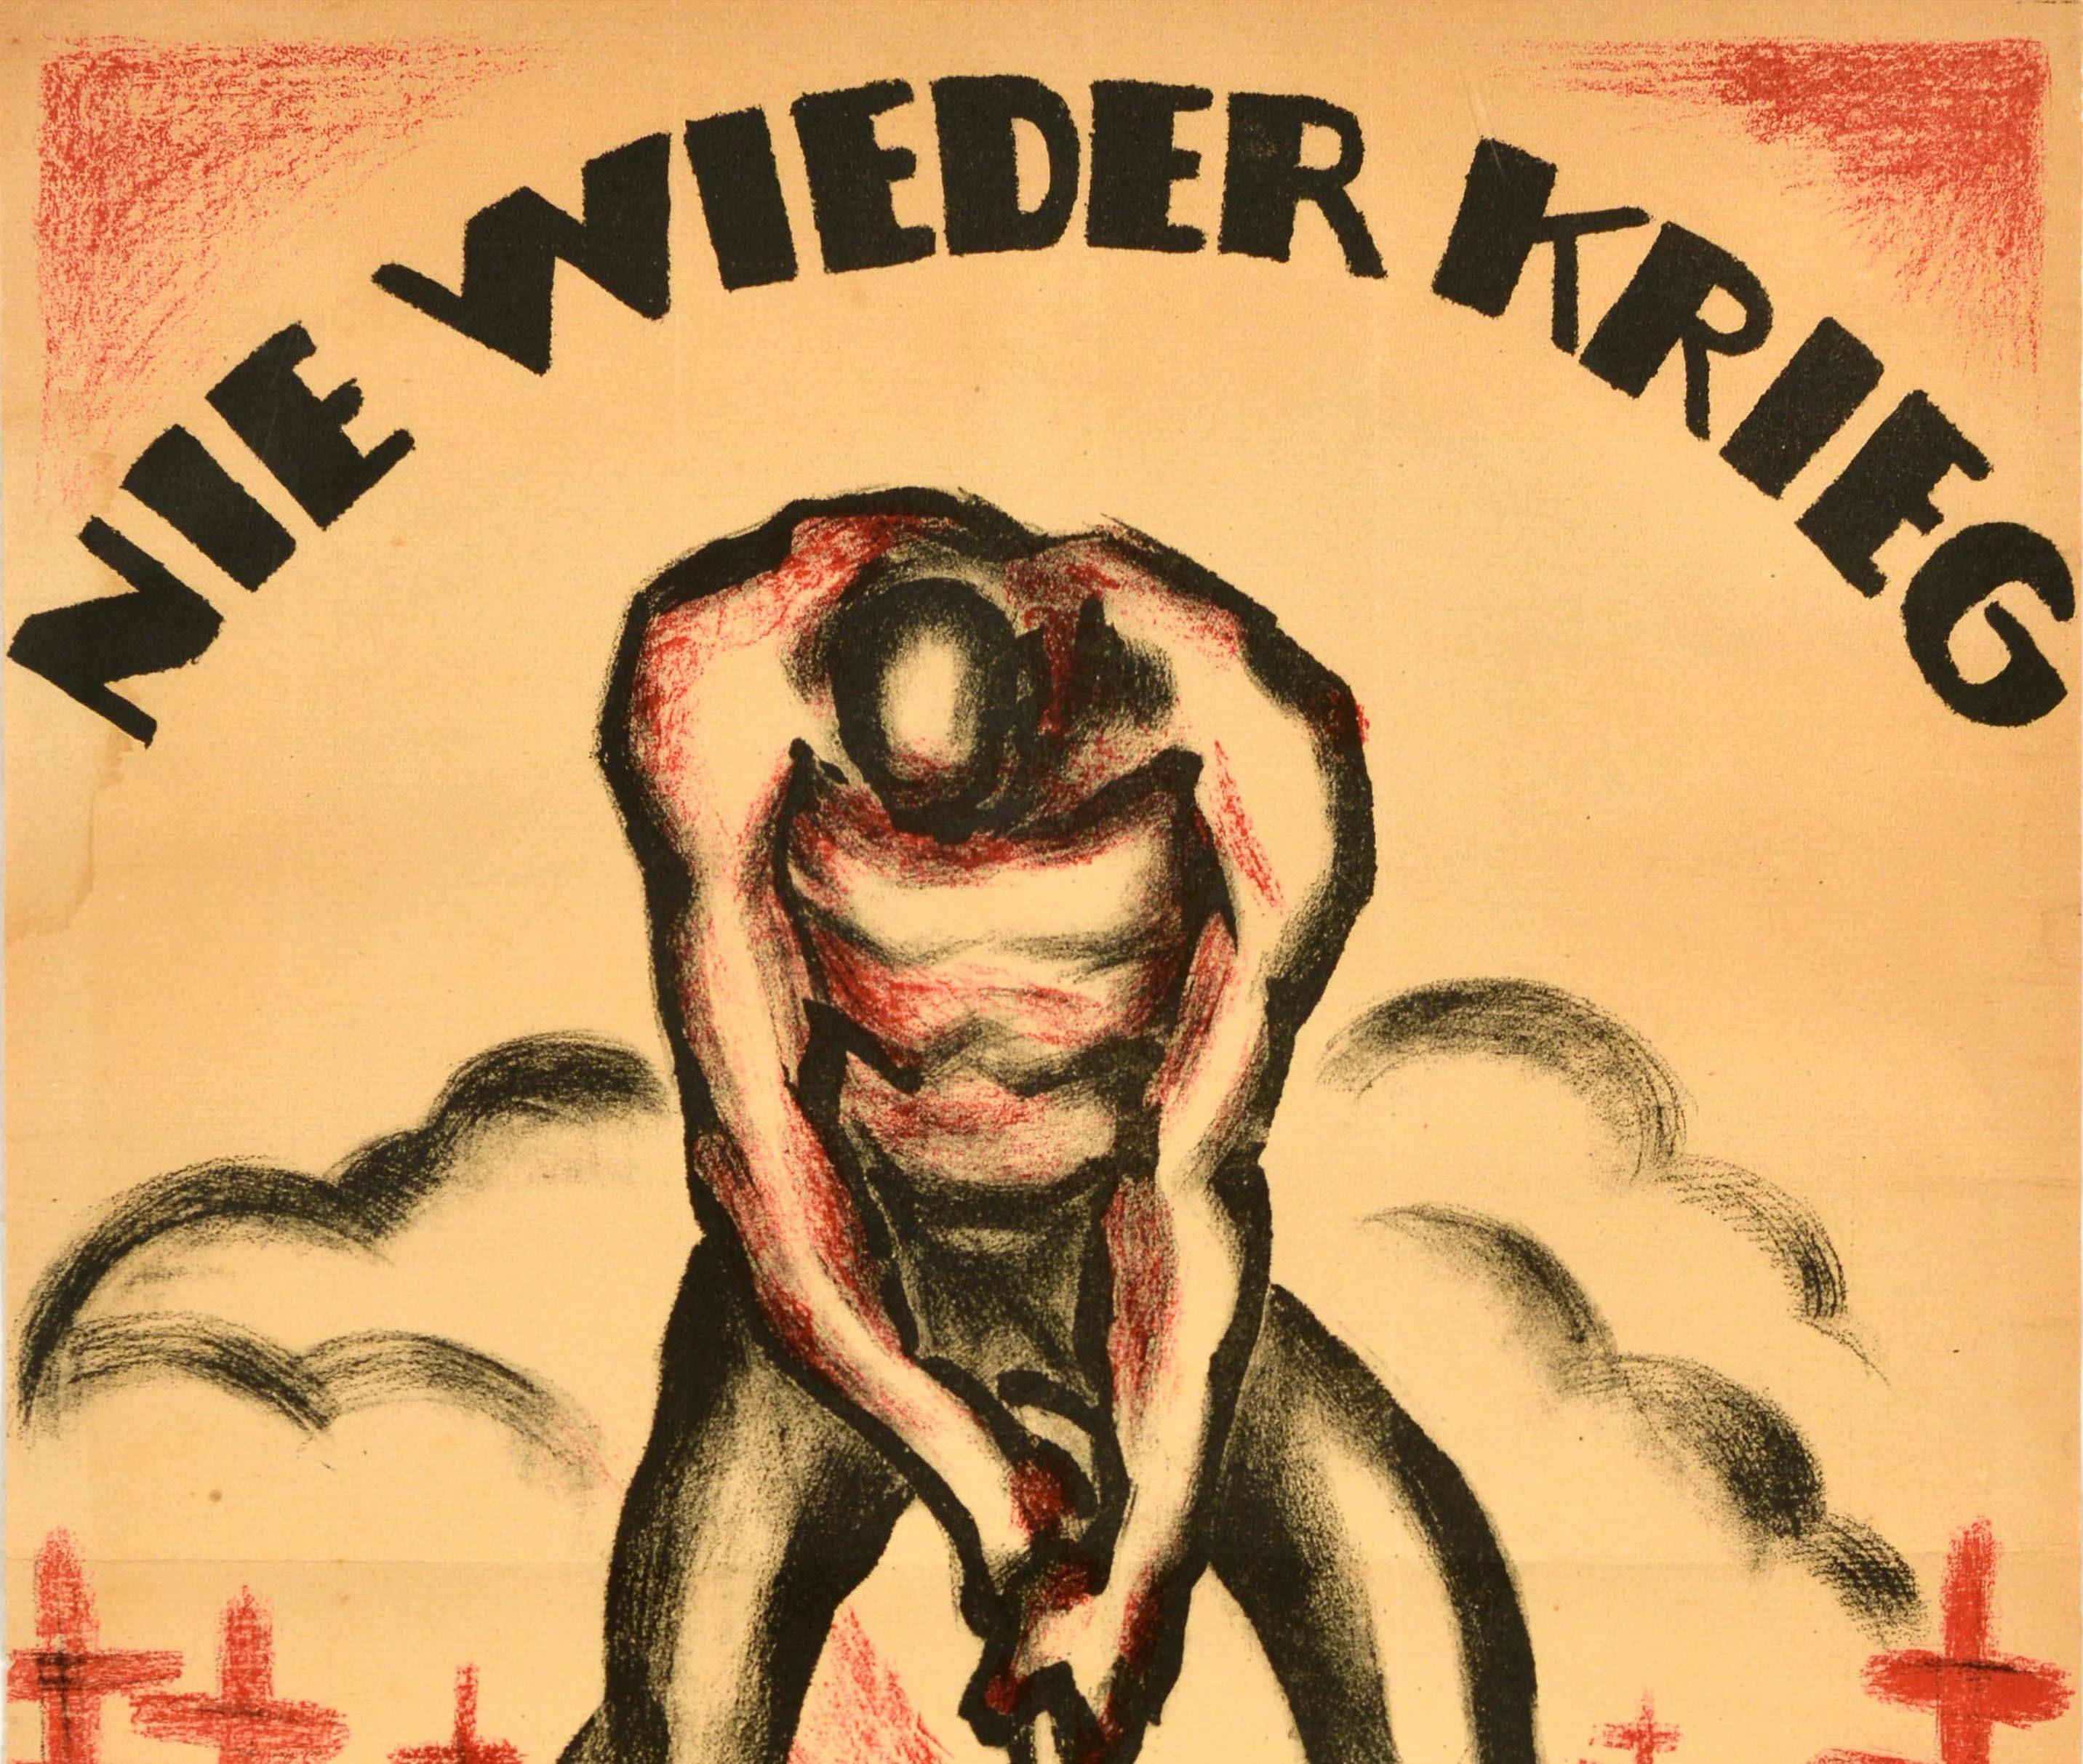 Original antique World War One poster - Nie Wieder Krieg / Never Again War - featuring a dynamic illustration in black and red depicting a man in black trousers bending over and smashing a cannon with the red strikes radiating out in front of red